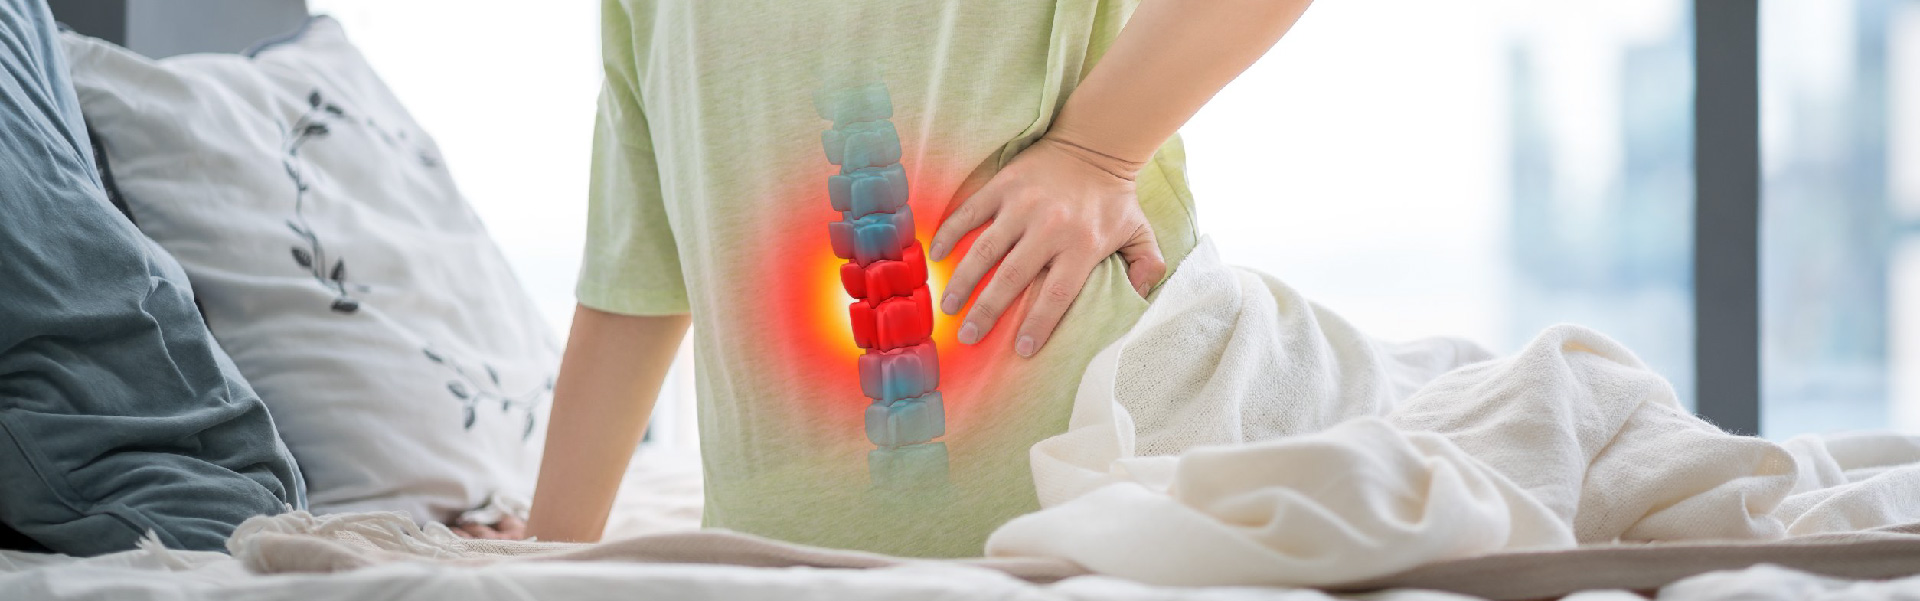 Car Accident Chiropractor near Goldenrod Florida